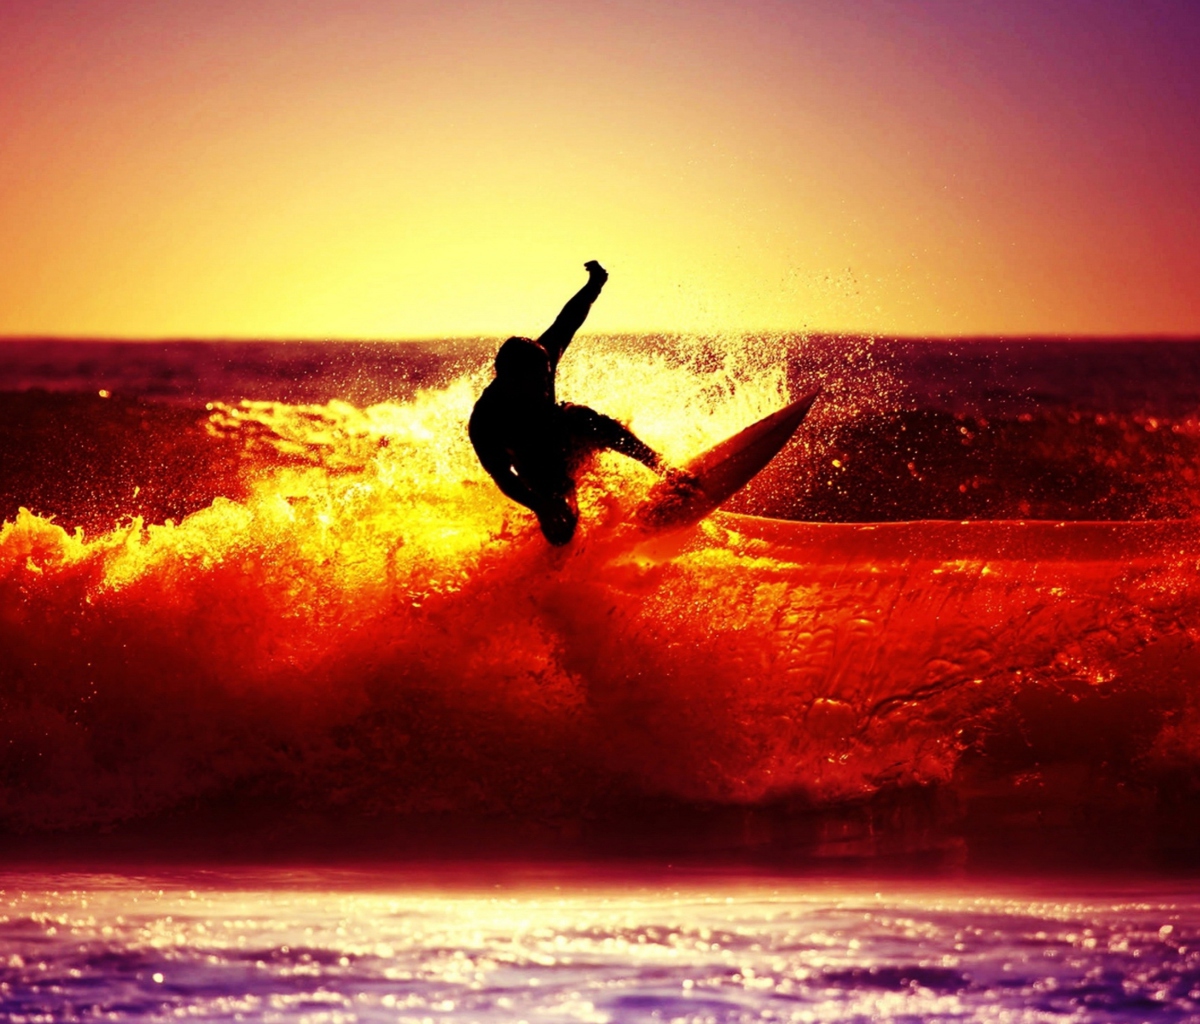 Surfing At Sunset wallpaper 1200x1024